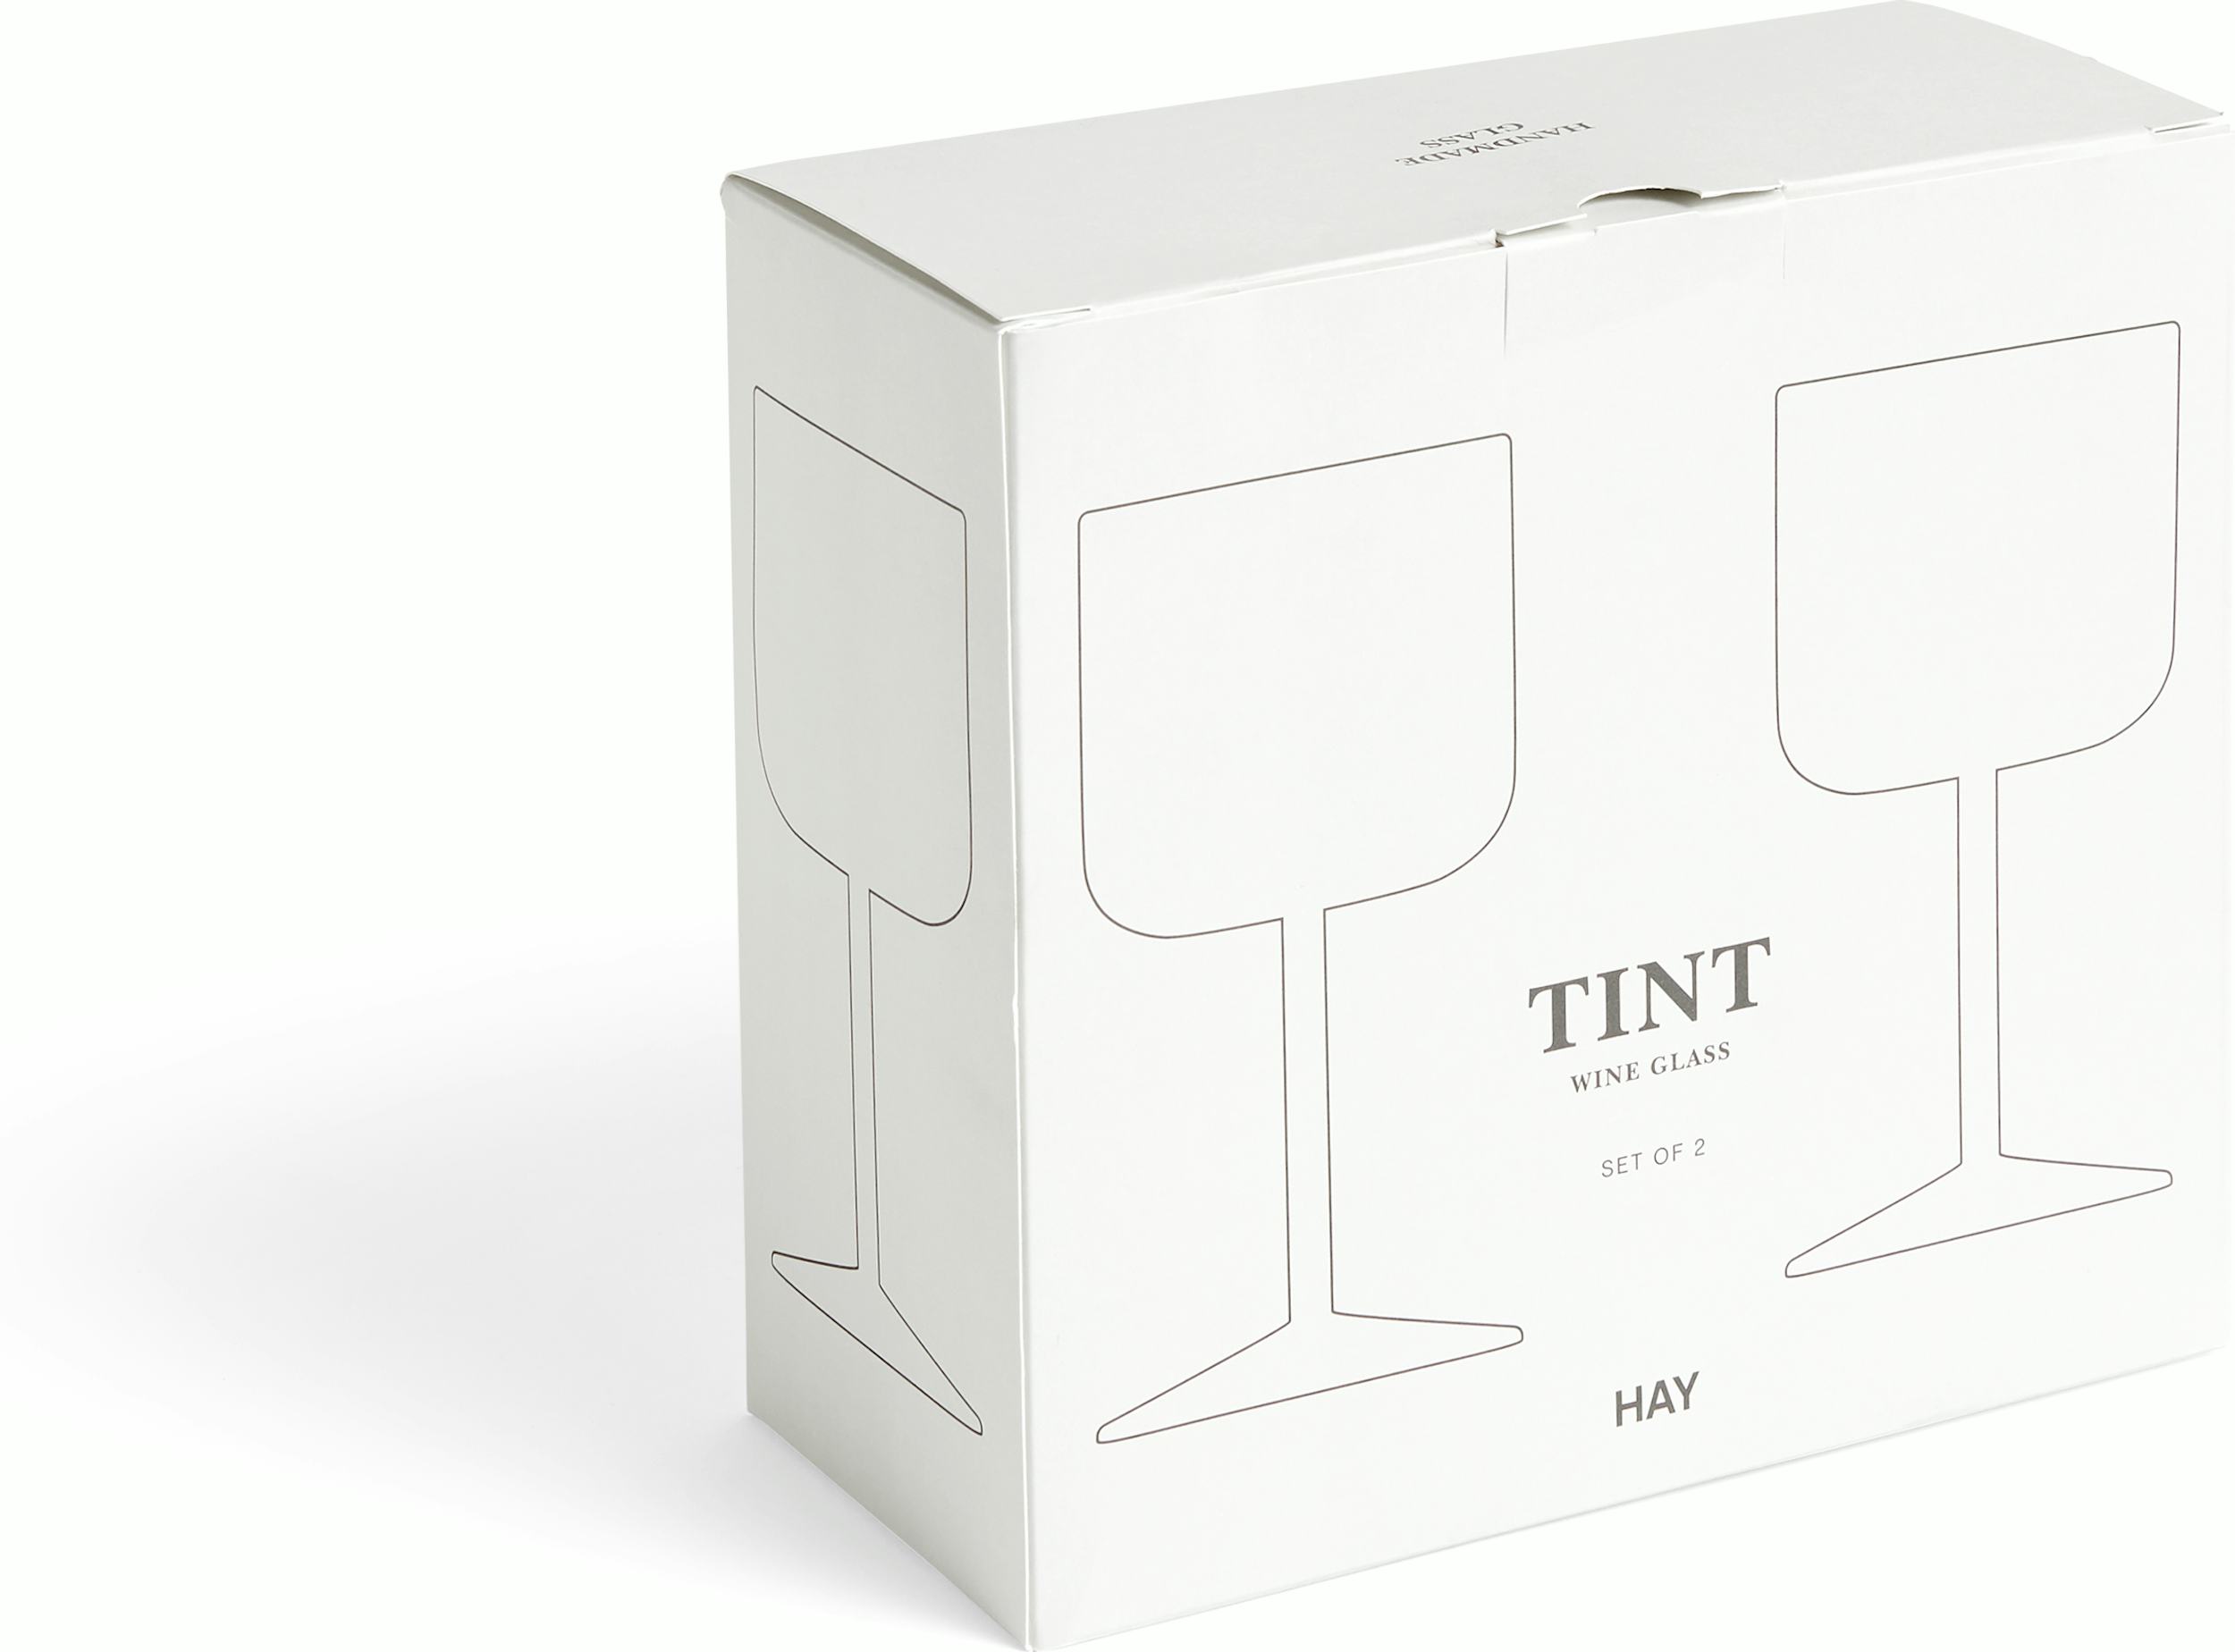 https://images.hermanmiller.group/m/79d4af5e5218c44e/W-HAY_2526601_tint_wine_glass_packaging_f.png?trim=auto&trim-sd=1&bg=f8f8f8&auto=format&w=2500&h=2500&q=50